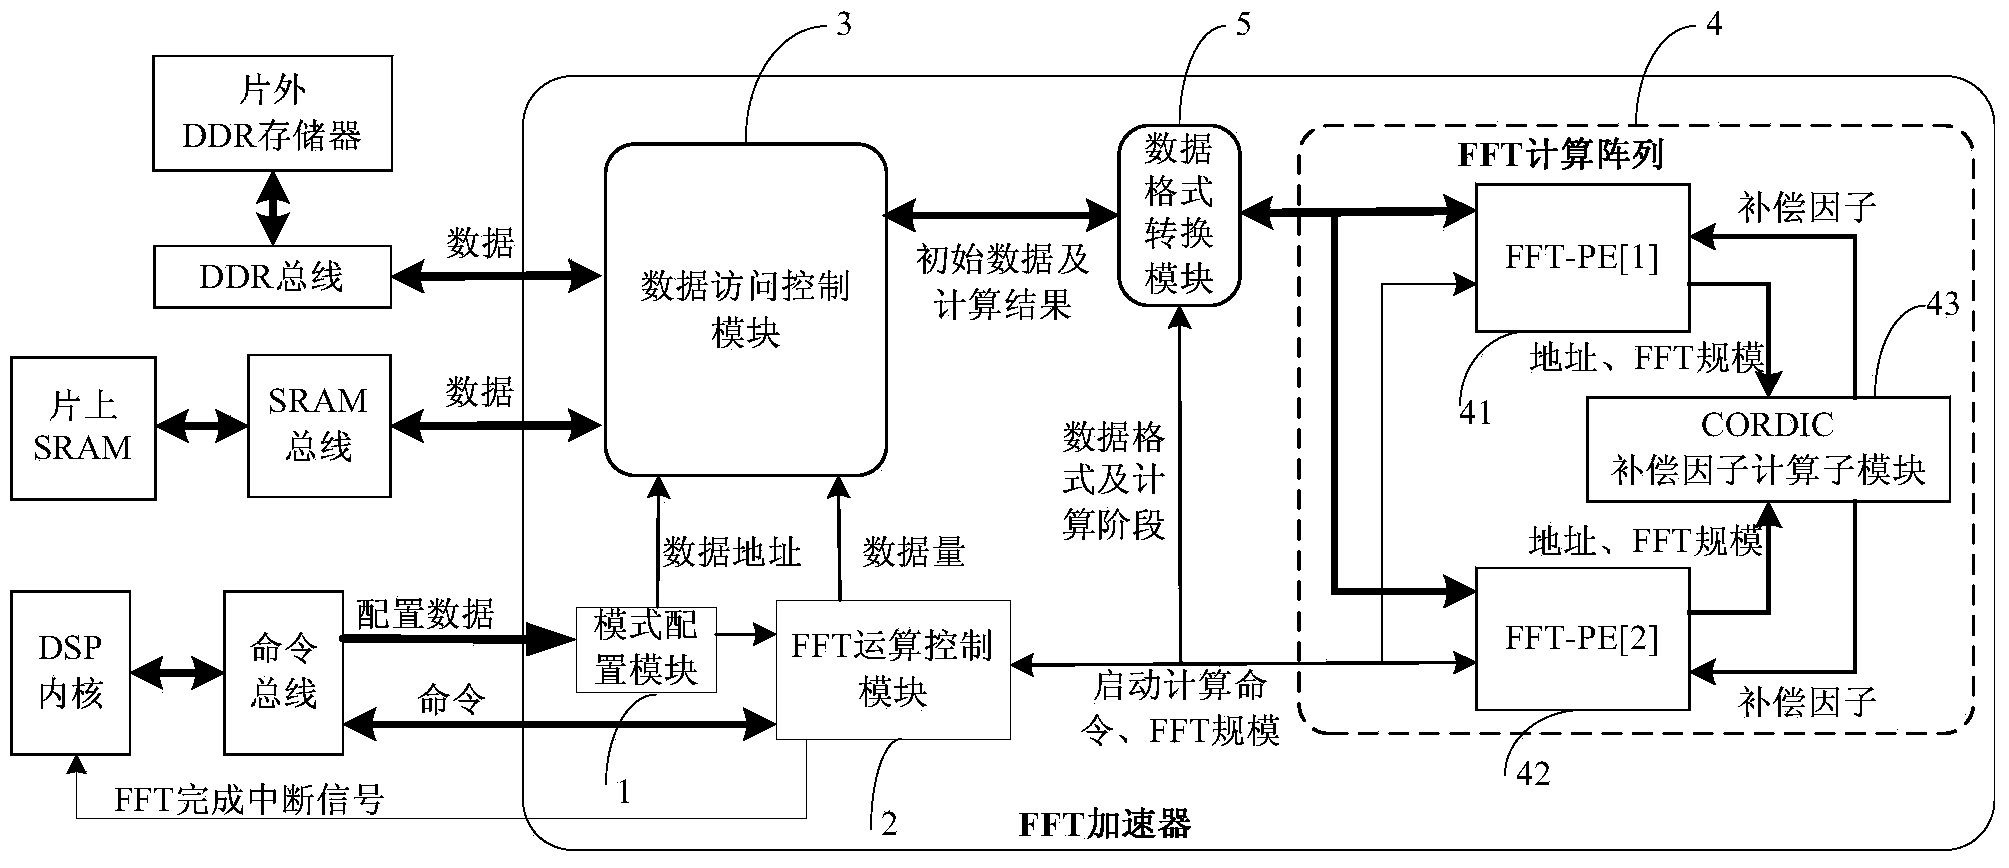 FFT accelerator based on DSP chip